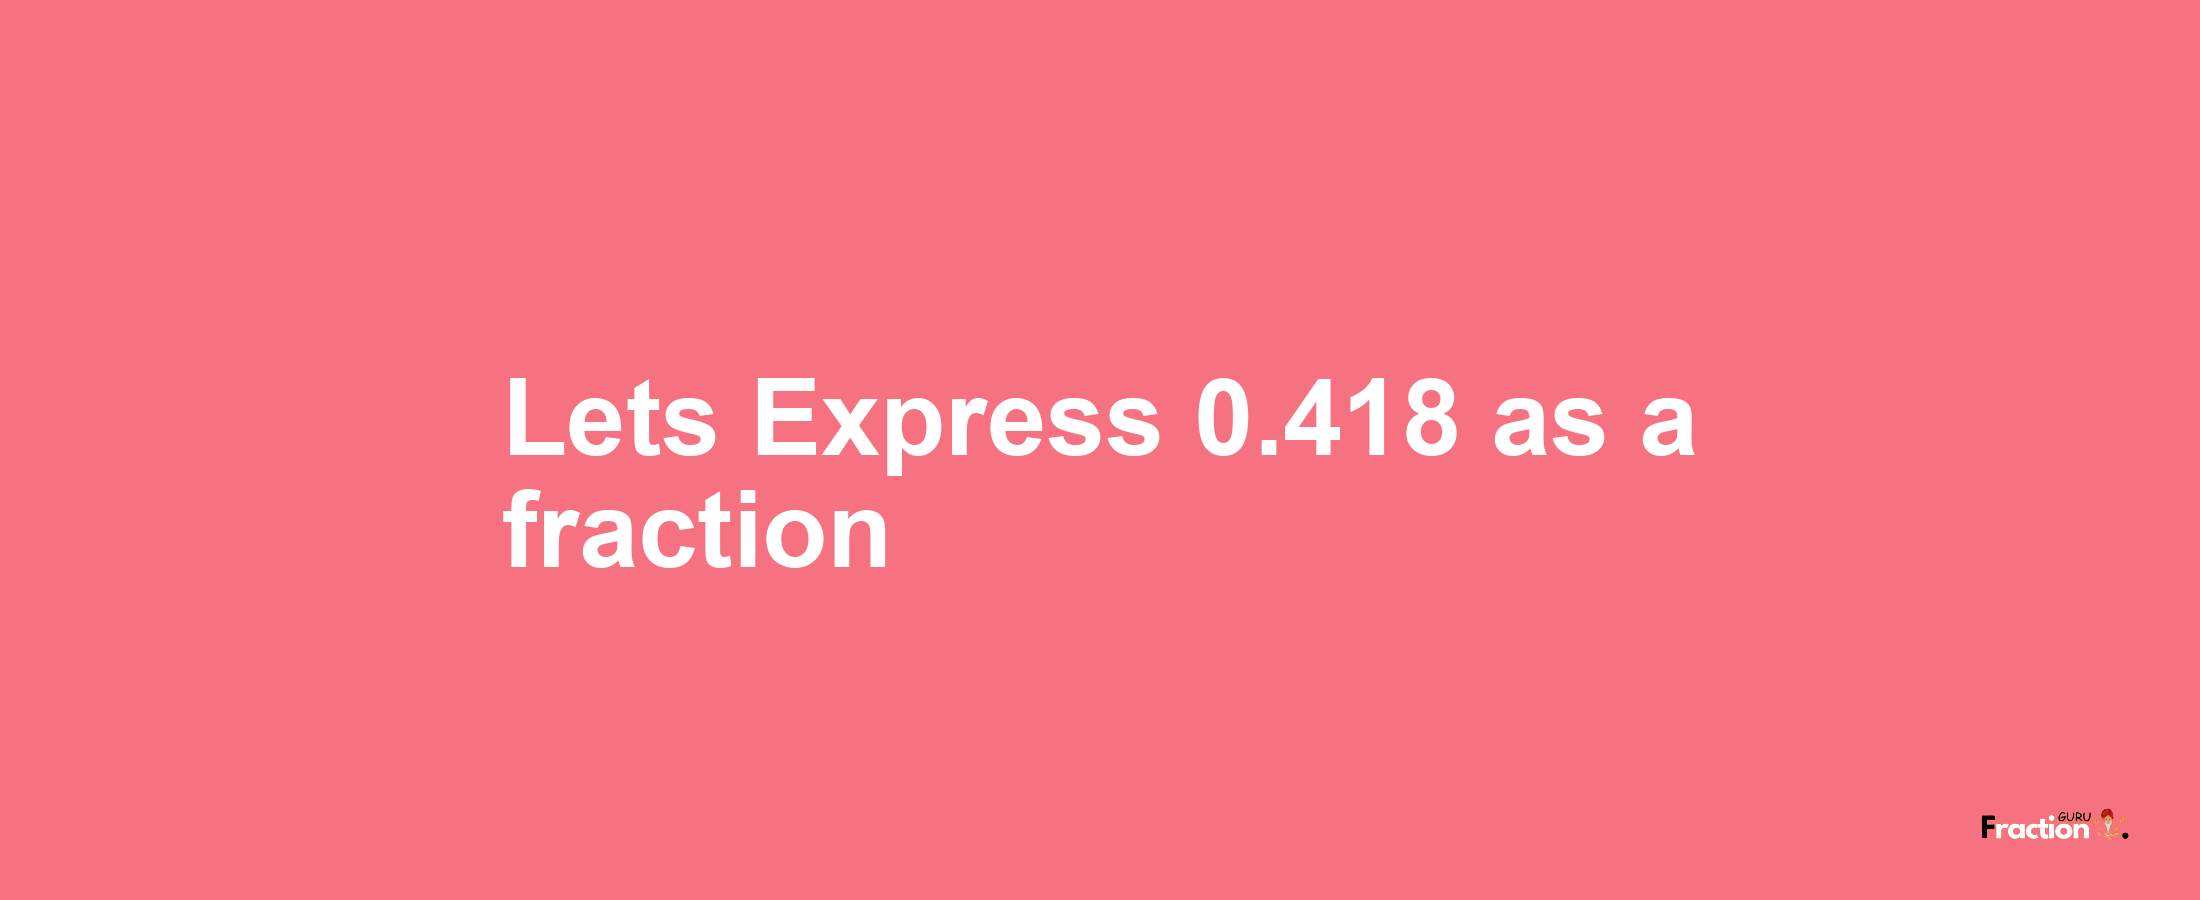 Lets Express 0.418 as afraction